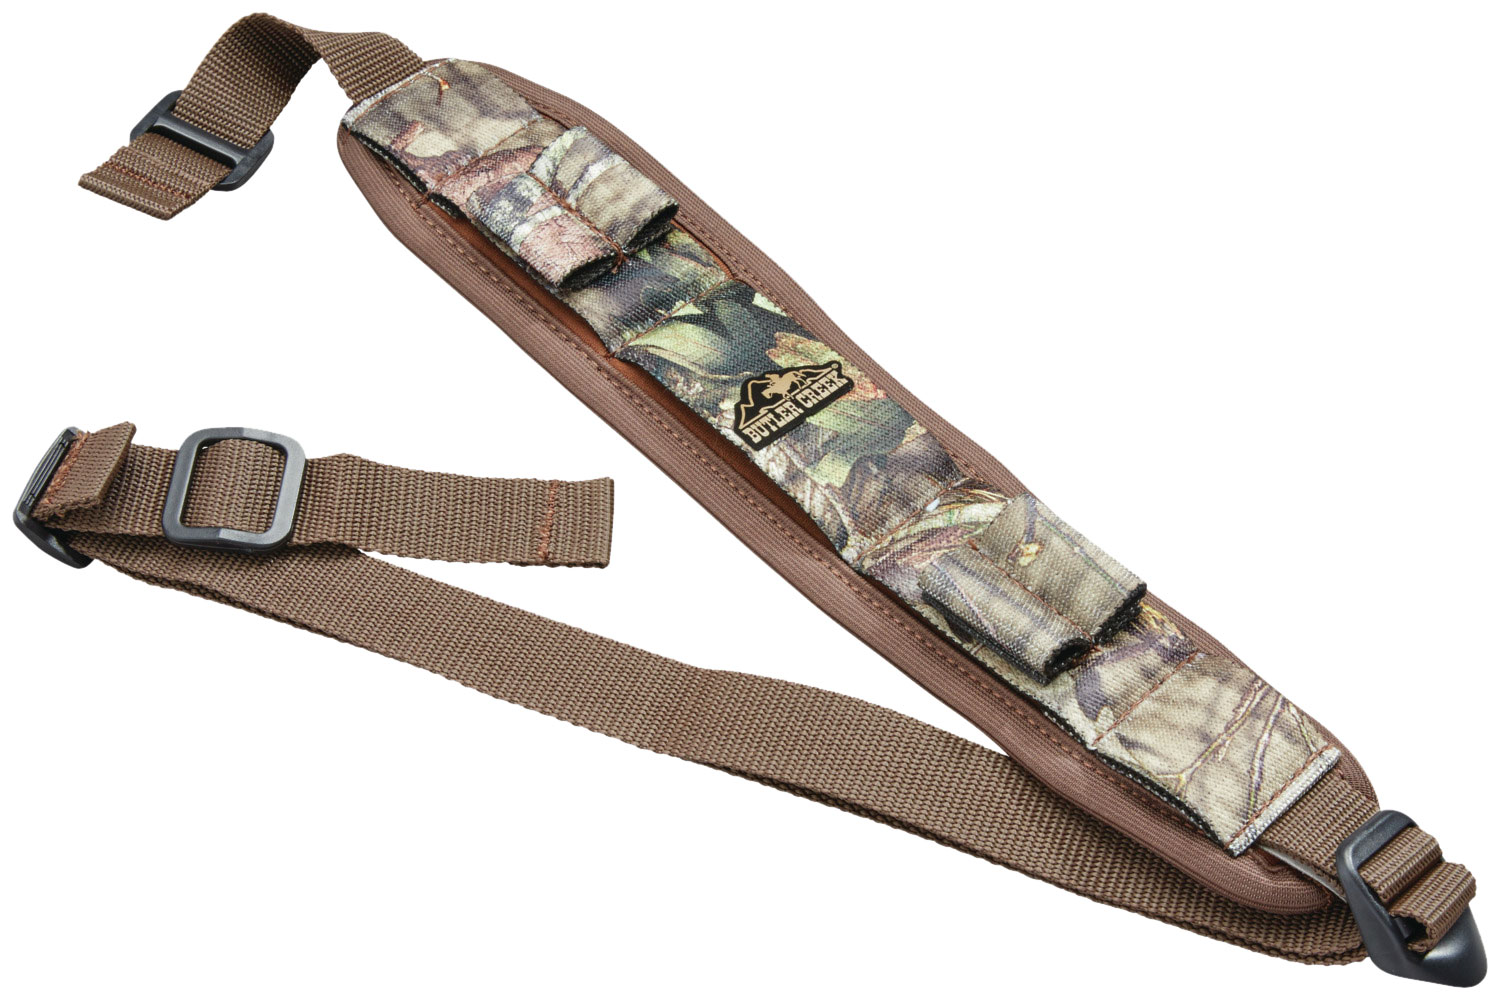 Butler Creek 180037 Comfort Stretch Alaskan Magnum Sling made of Mossy Oak Break-Up Country Neoprene with Non-Slip Grippers, 20